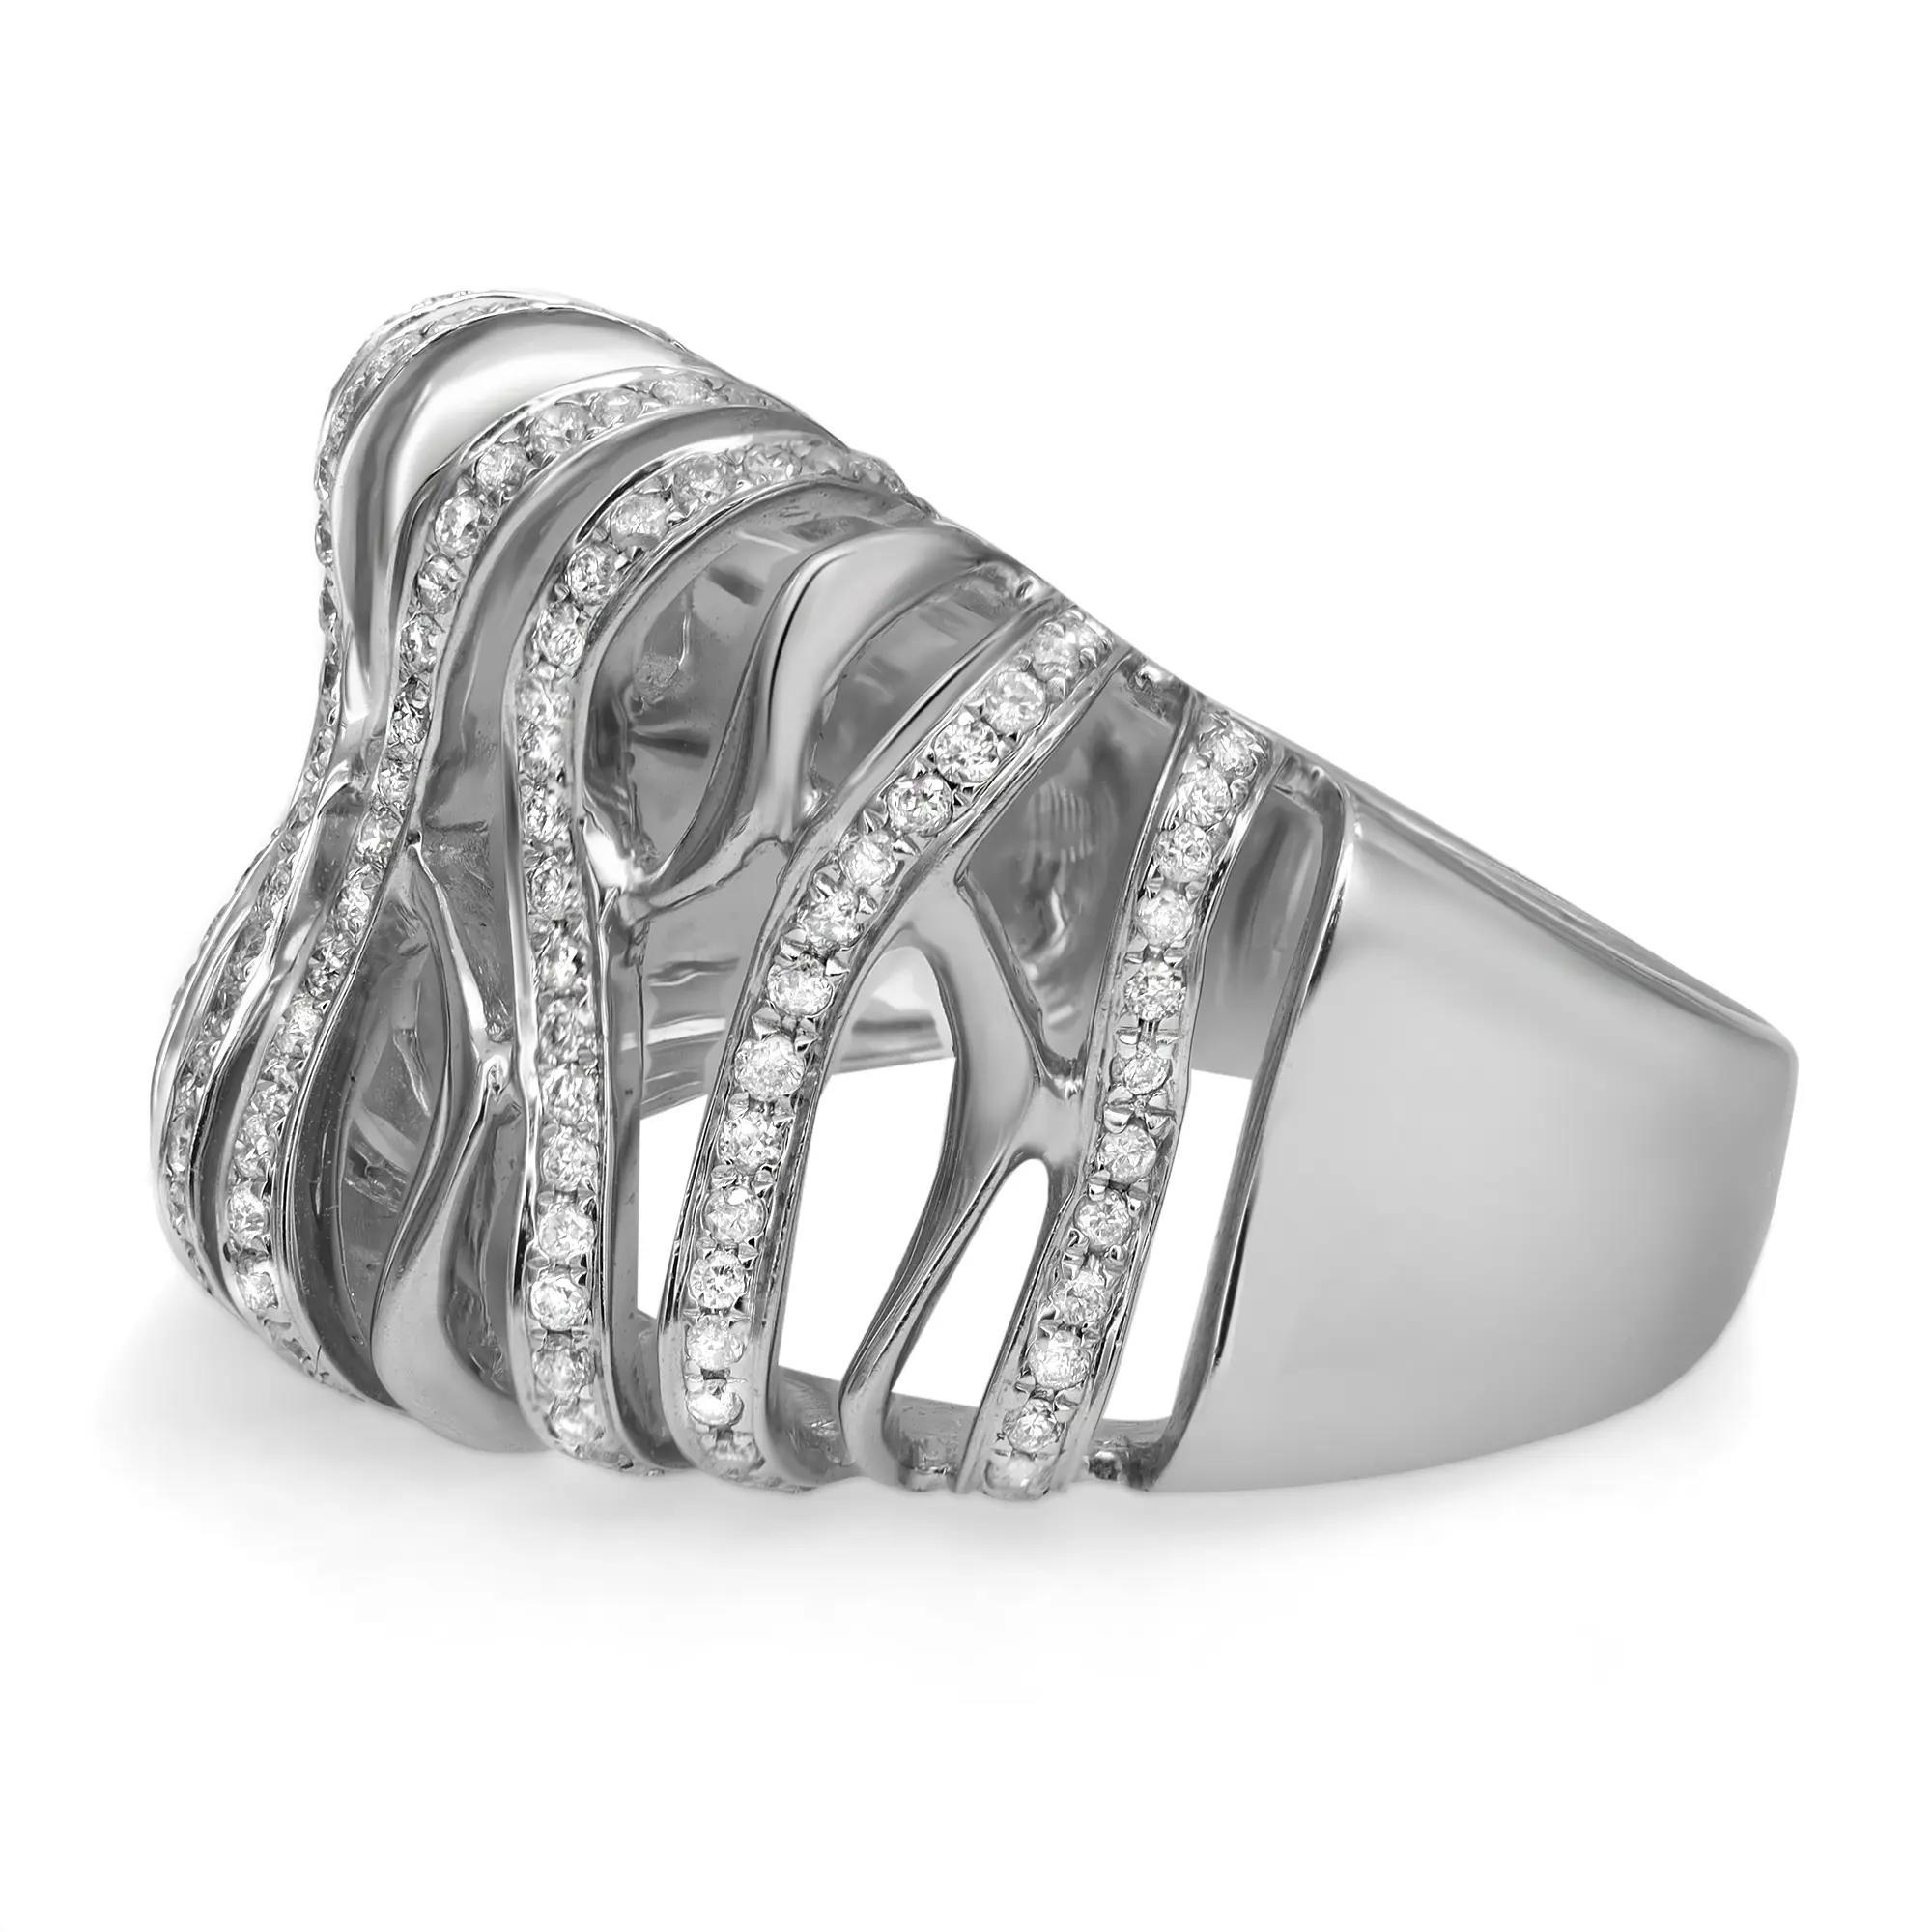 This beautiful diamond wide band ring showcases pave set round cut diamonds in a modern one of a kind design. Crafted in fine 14k white gold. Total diamond weight: 0.57 carat. Diamond quality: color I and SI1 clarity. Ring size 7.75. Band width: